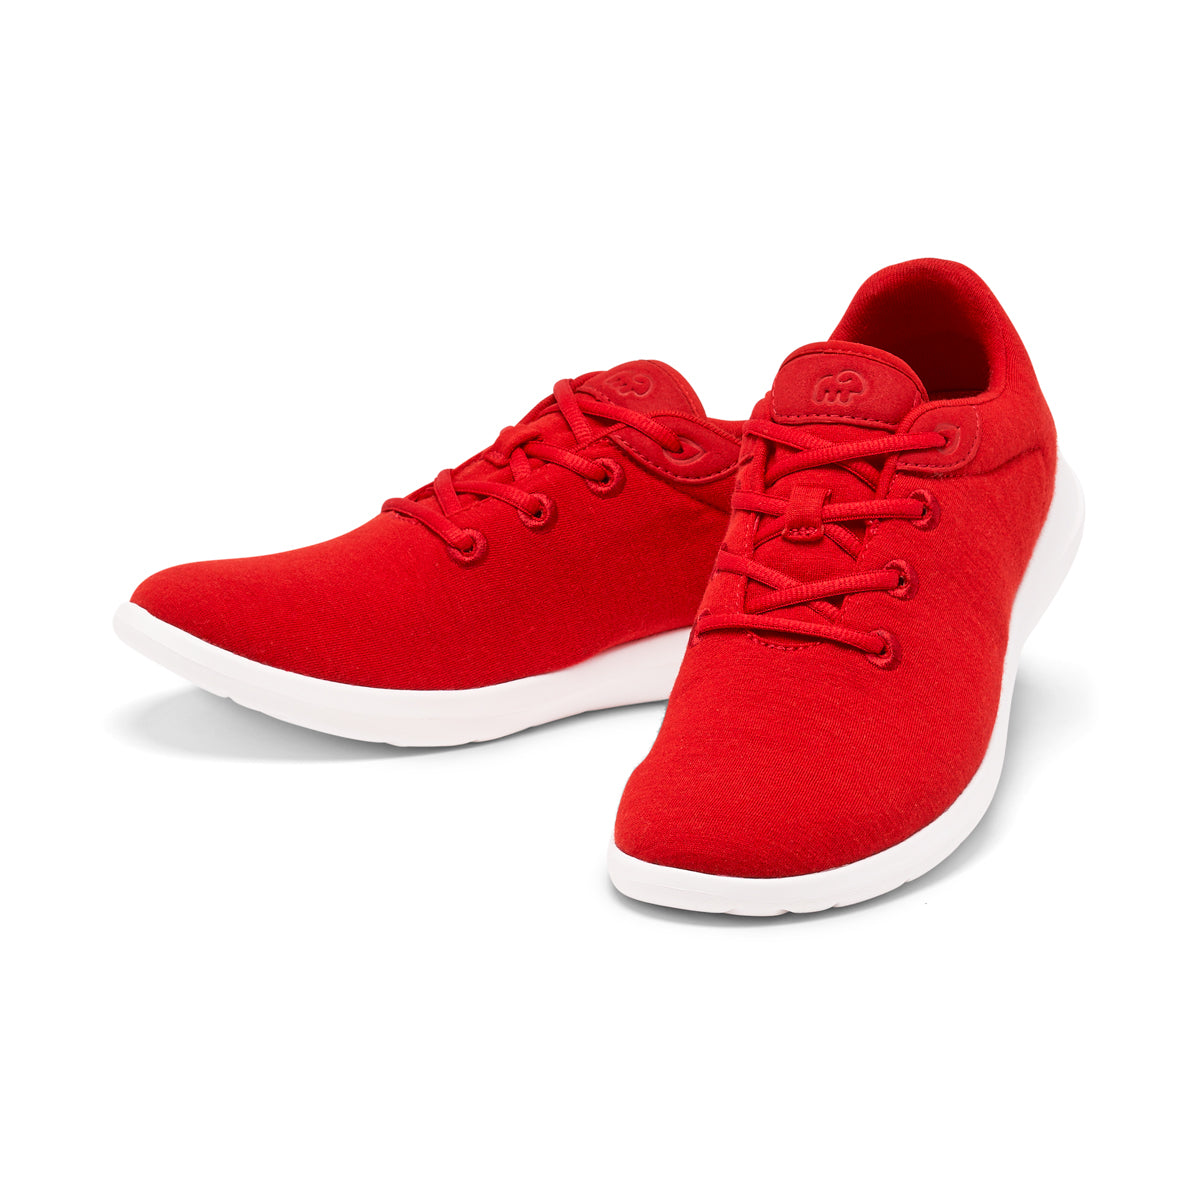 Men's Lace-Ups Red